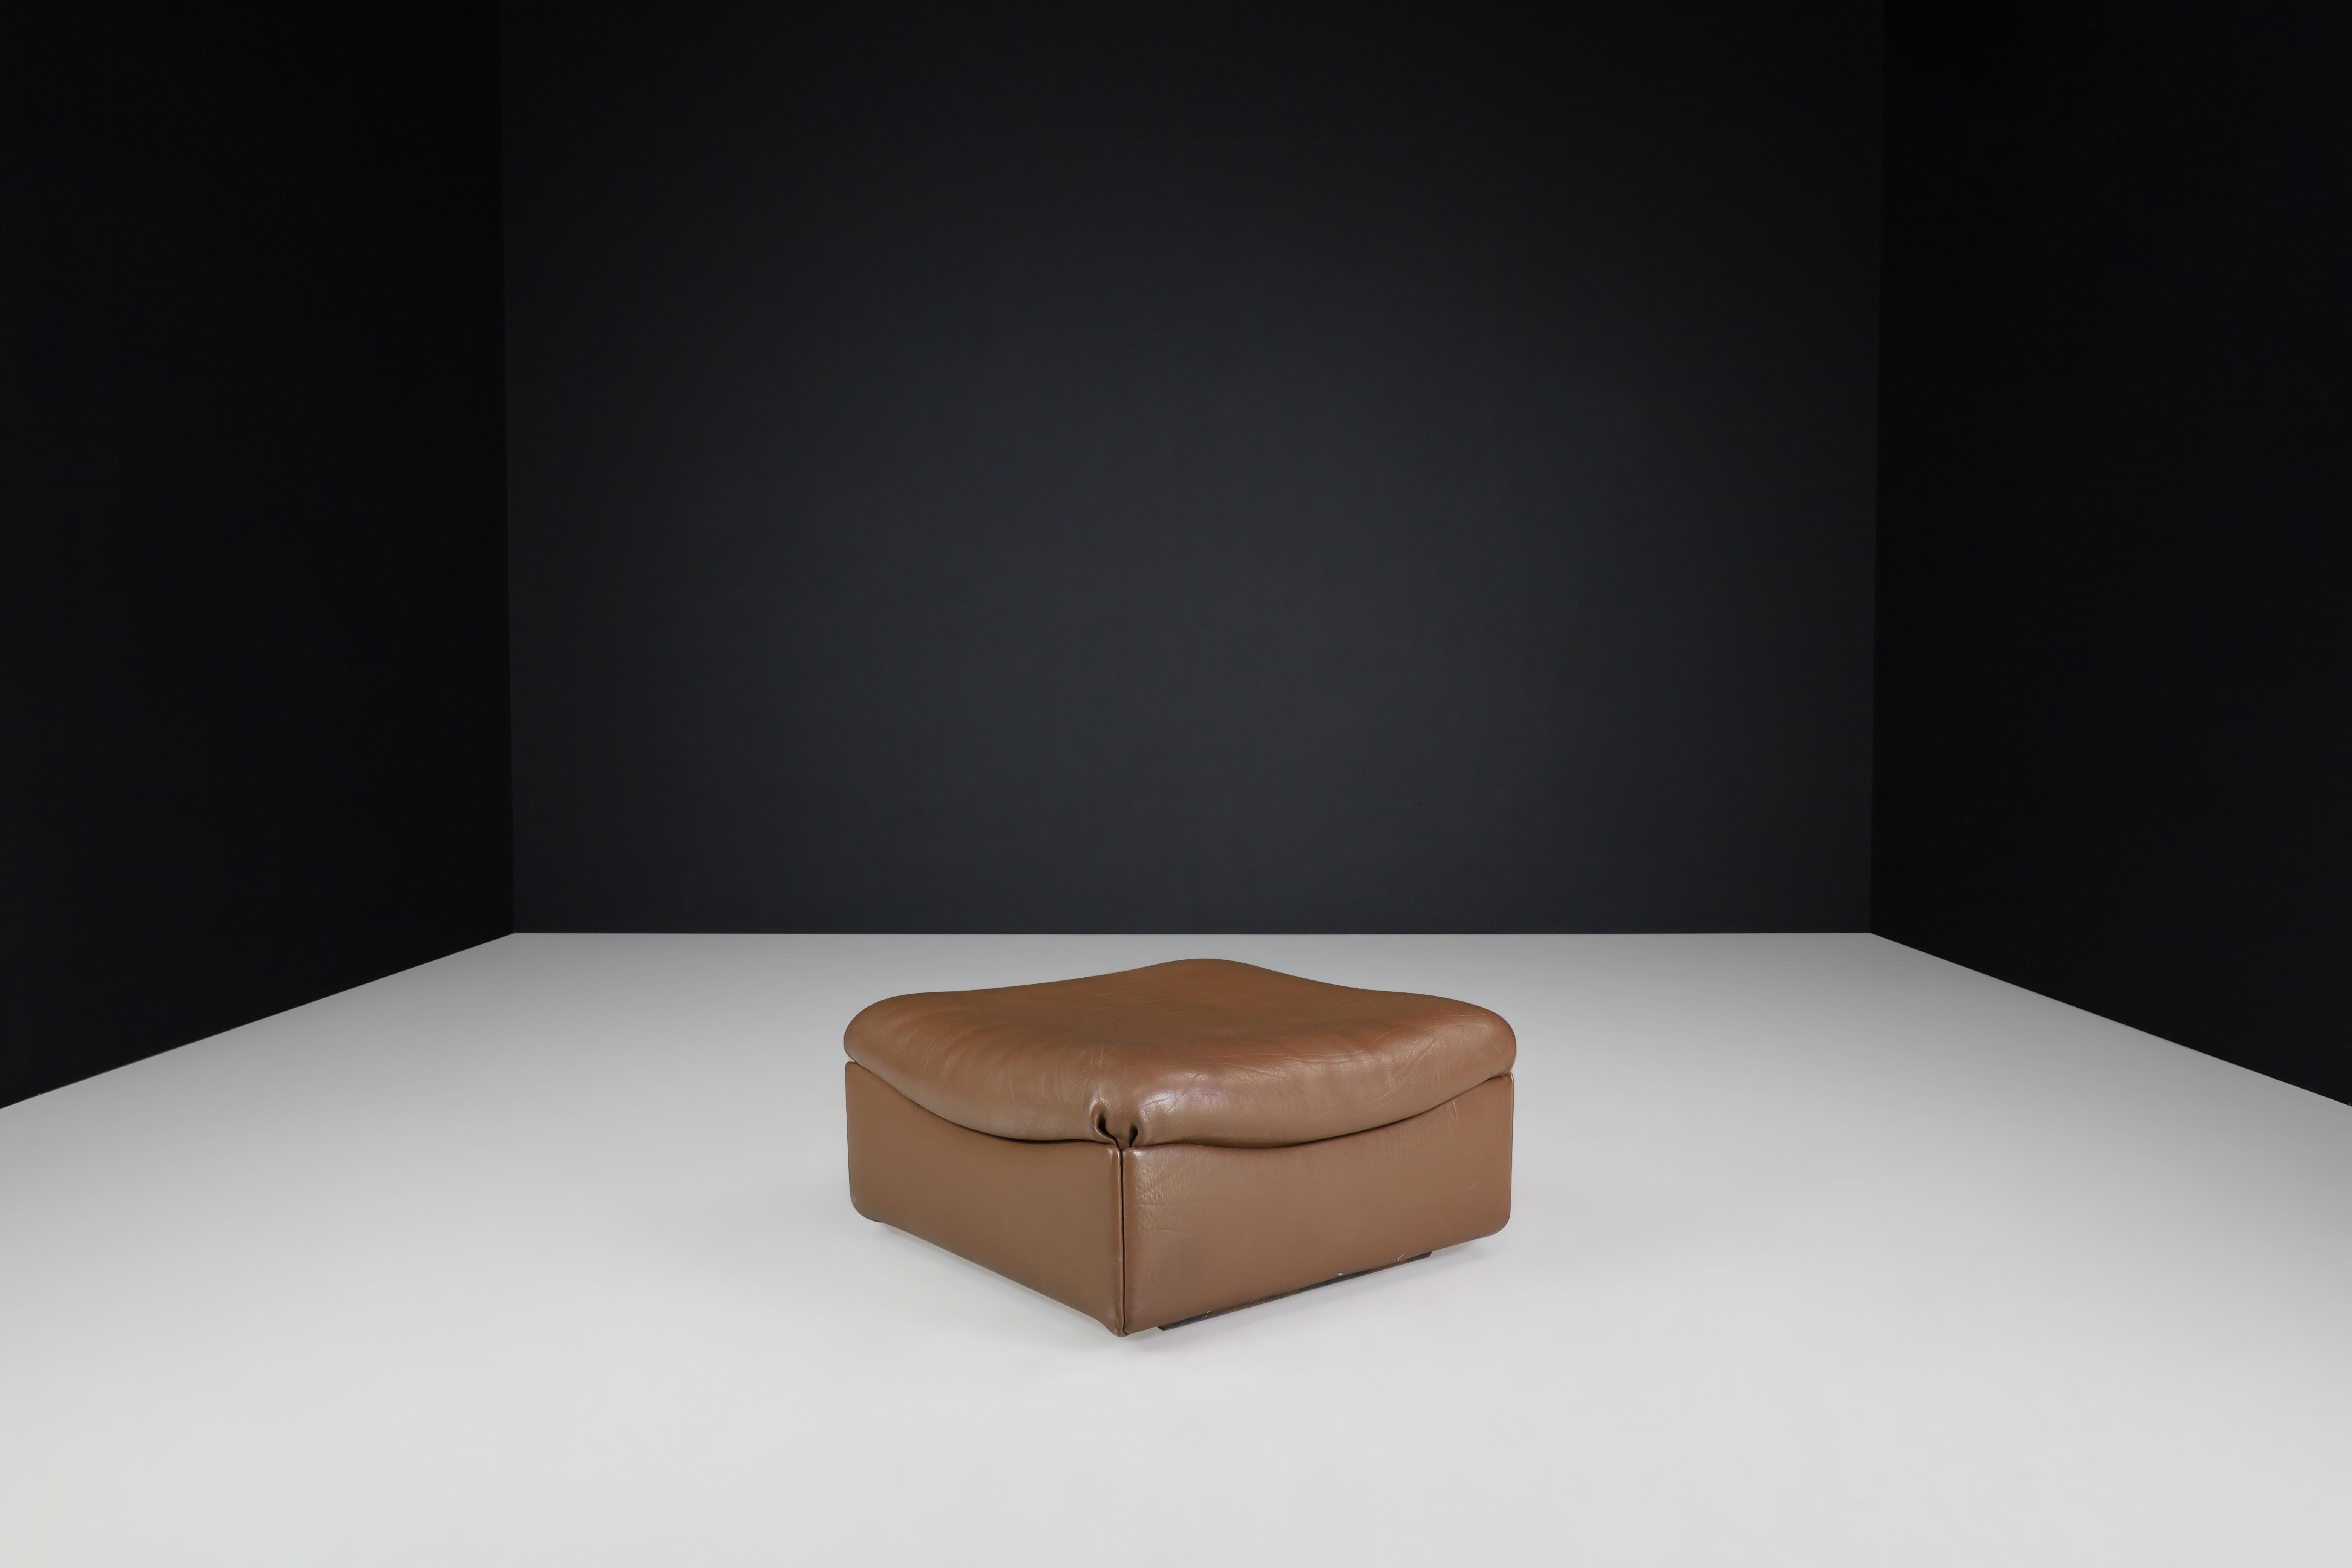 De Sede grande pouf in bufalo leather, Switzerland, 1970s.

This robust De Sede grande pouf ensures ultimate comfort and building quality with its solid wooden frame and thick handstitched bufalo leather upholstery. Nice original patina. Original